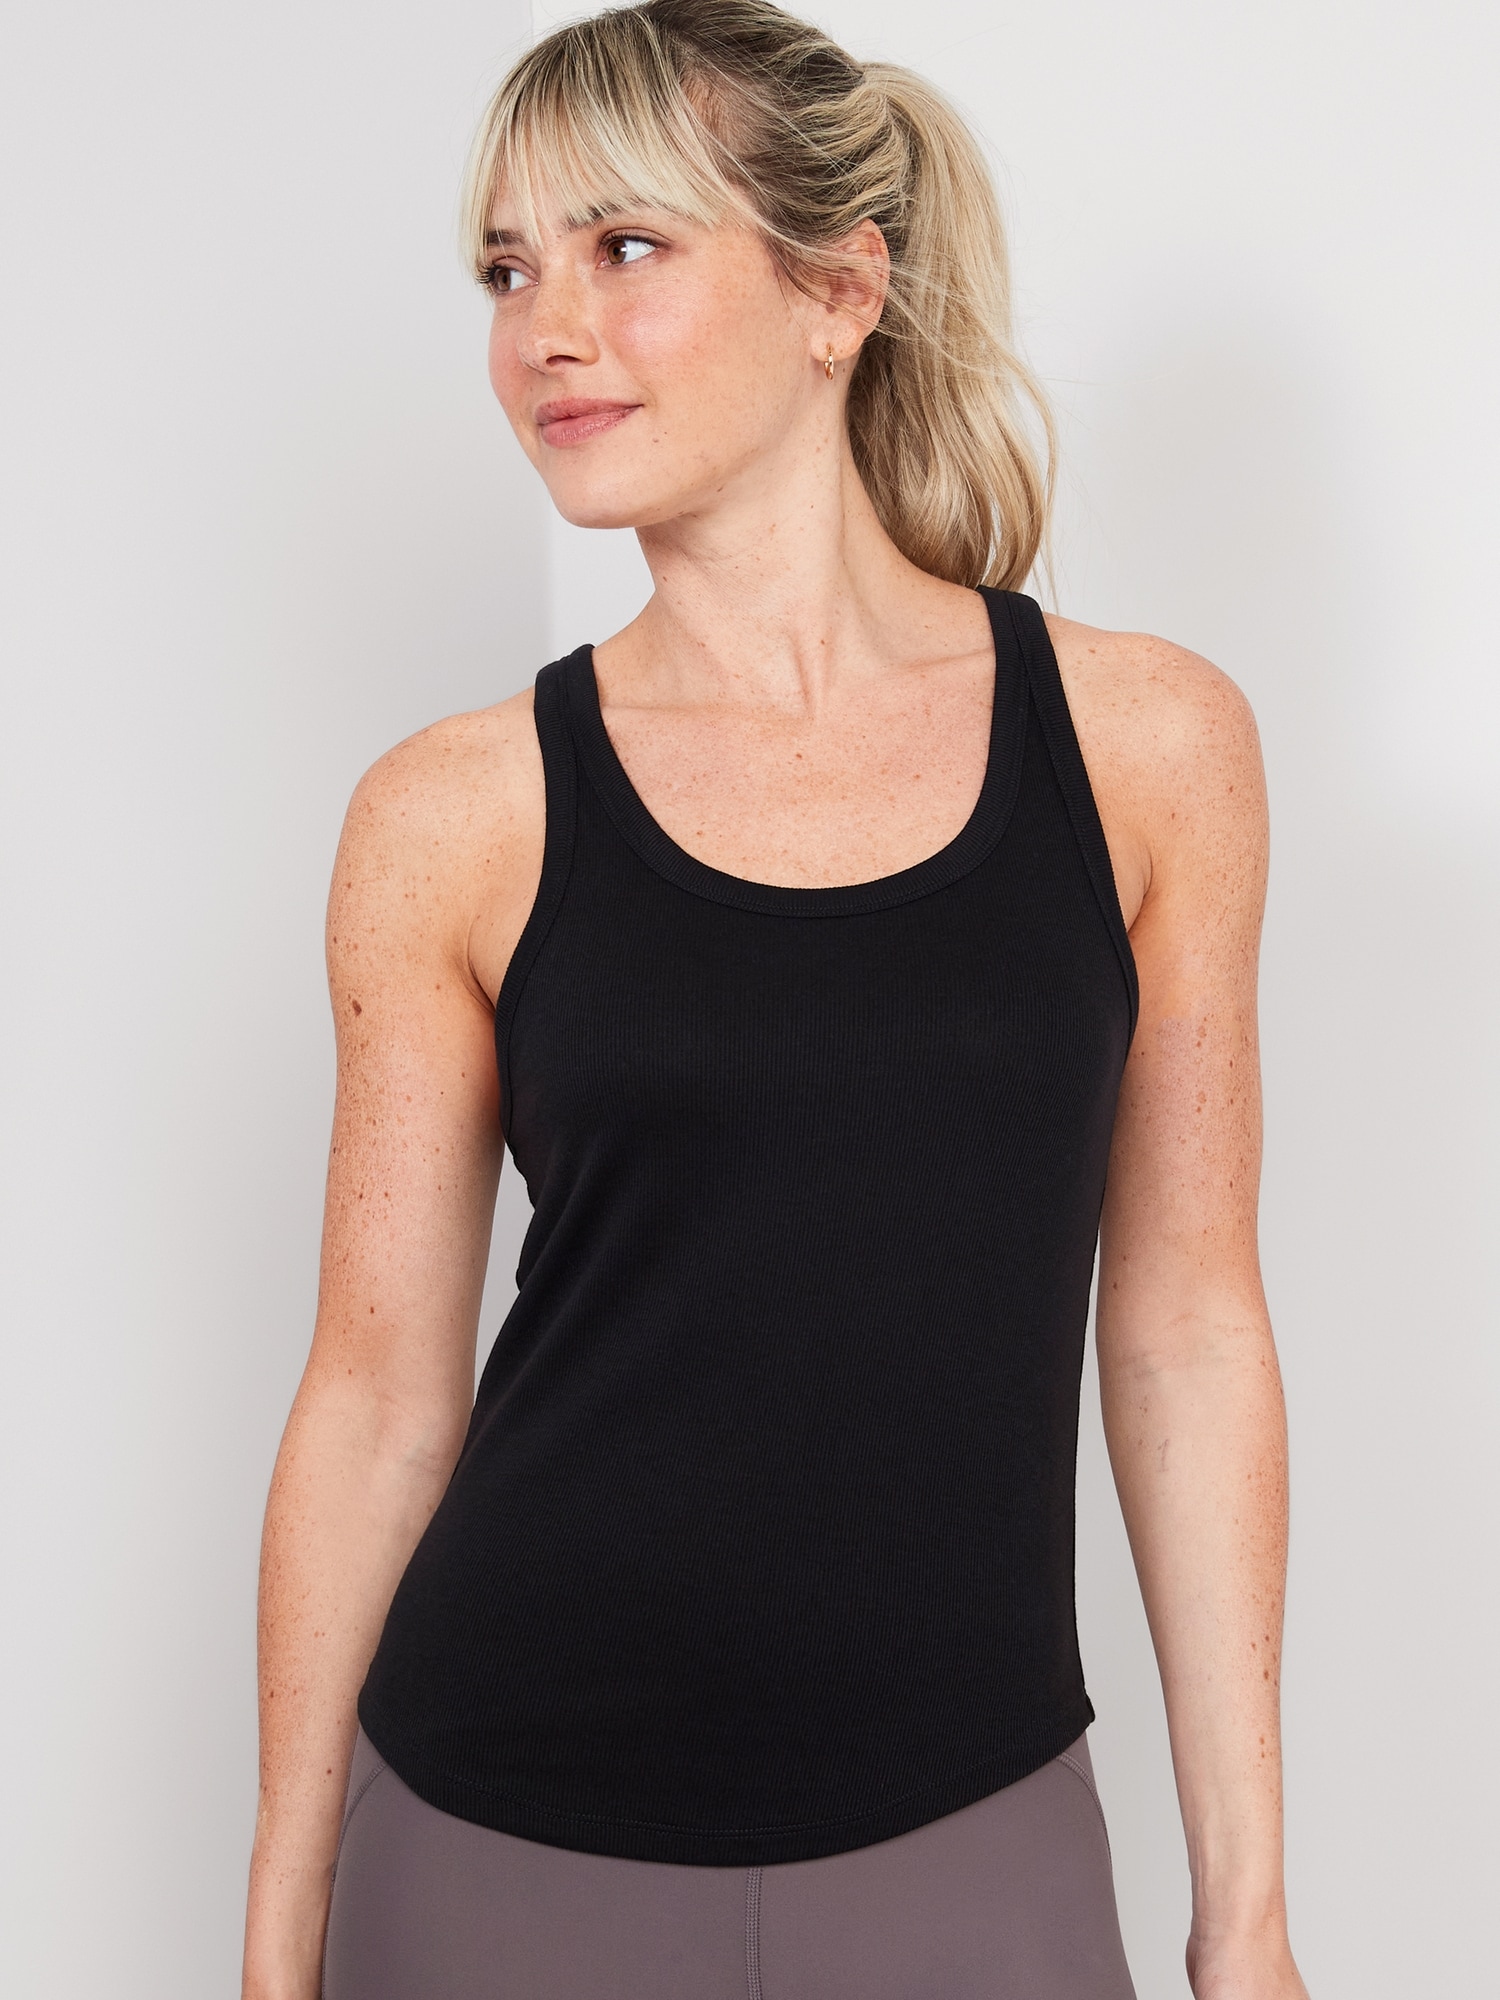 OLD NAVY RIBBED Fitted Tank Top Women's One Size Black Scoop Neck Racerback  $10.58 - PicClick AU